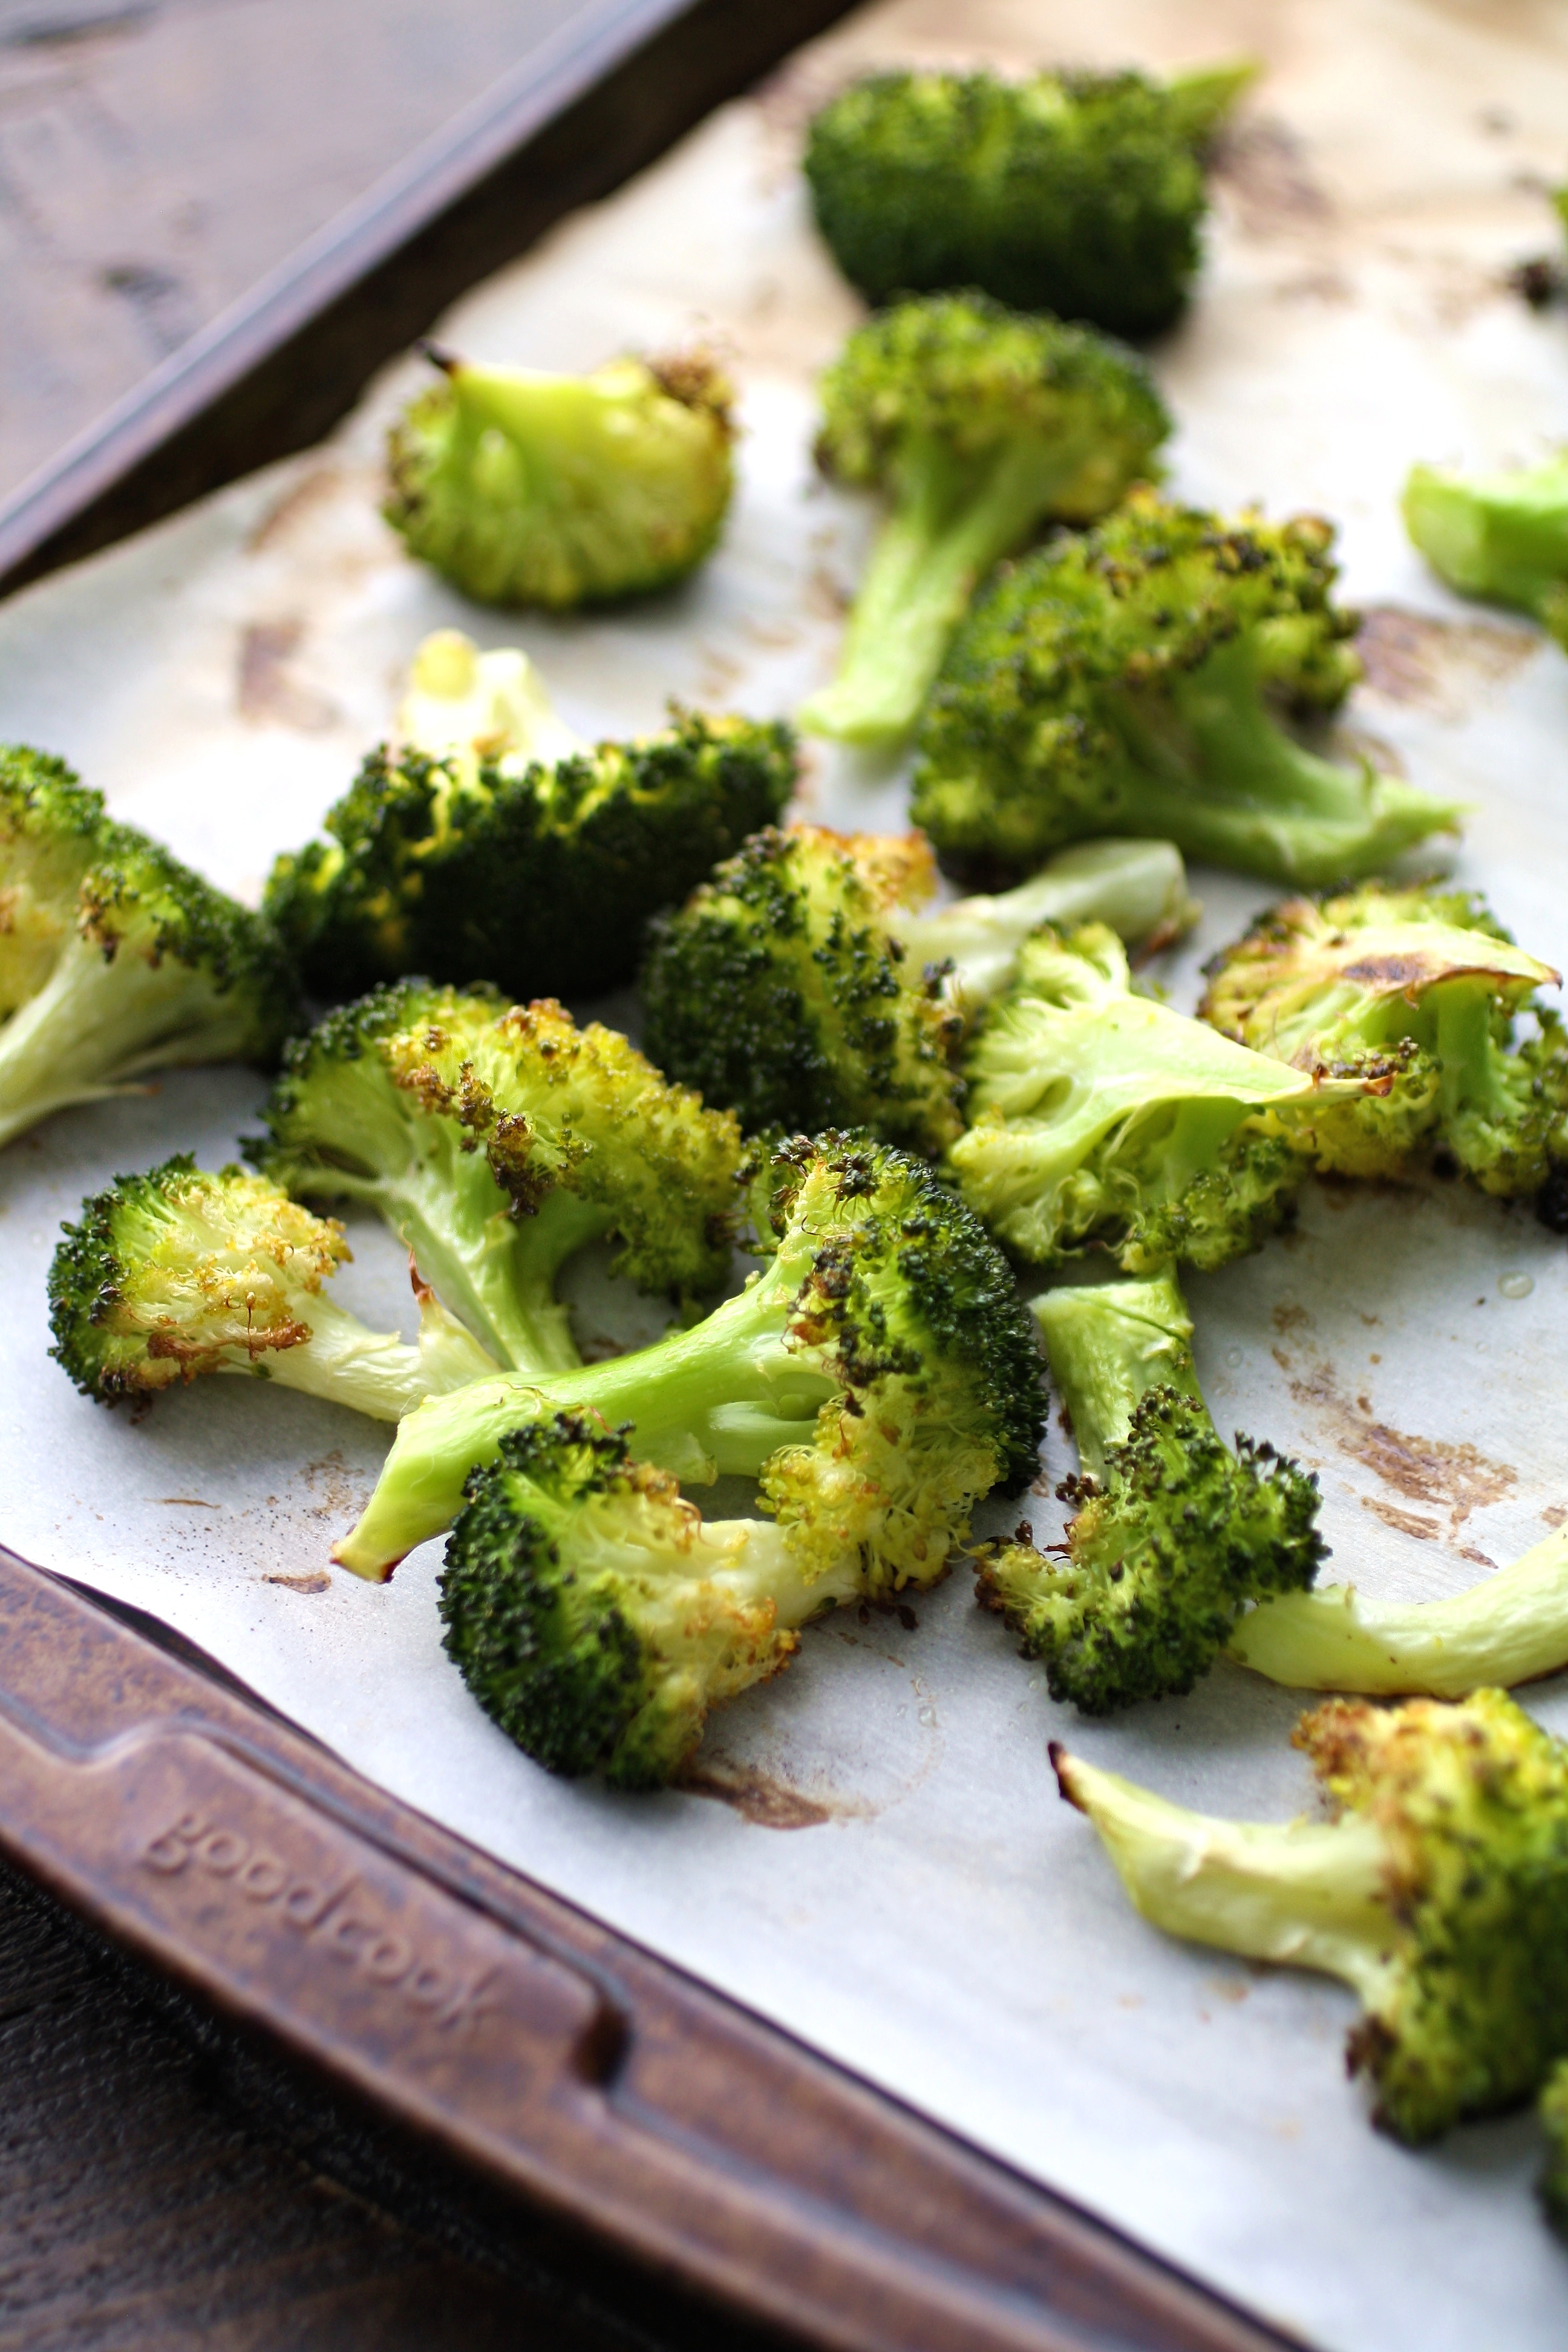 Roasted broccoli is so flavorful! Roasted Broccoli and Swiss Quiche is a delight!